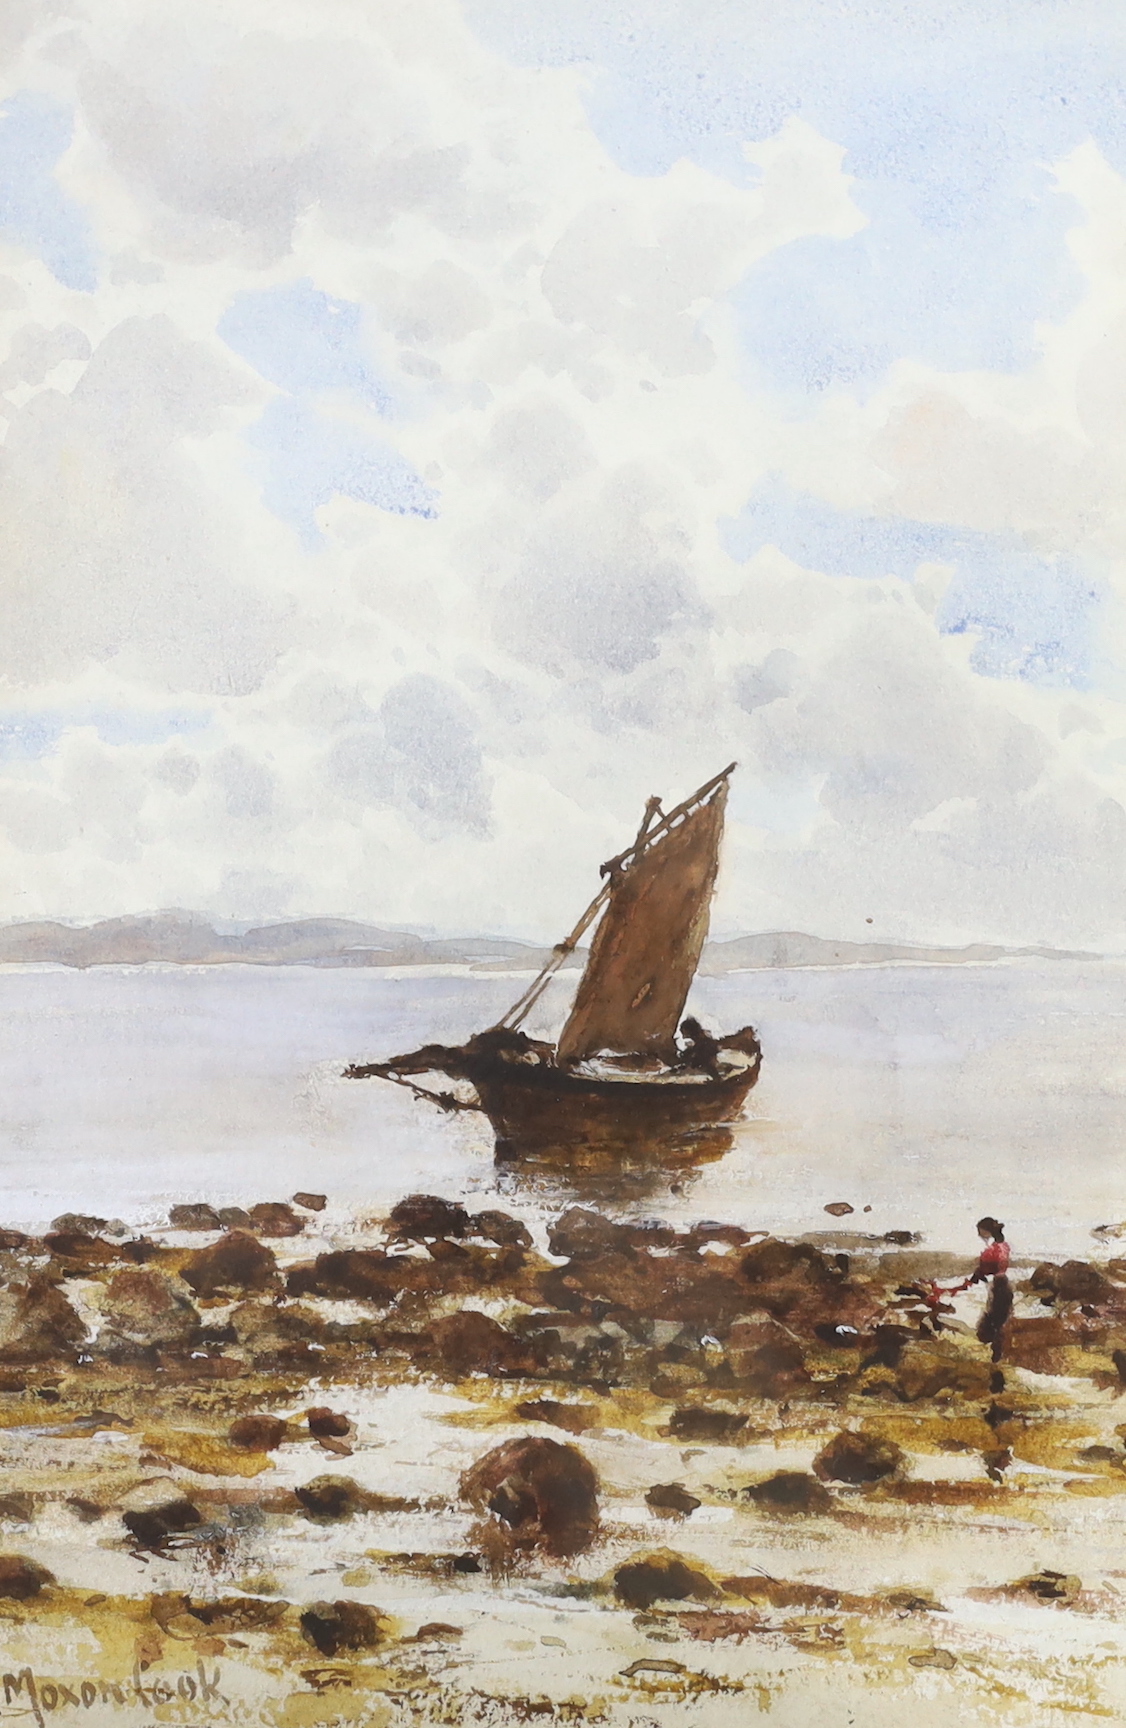 Herbert Moxon Cook (1844-1928), watercolour, Coastal scene with fishing boat, signed, indistinctly inscribed in ink verso, 26 x 17cm